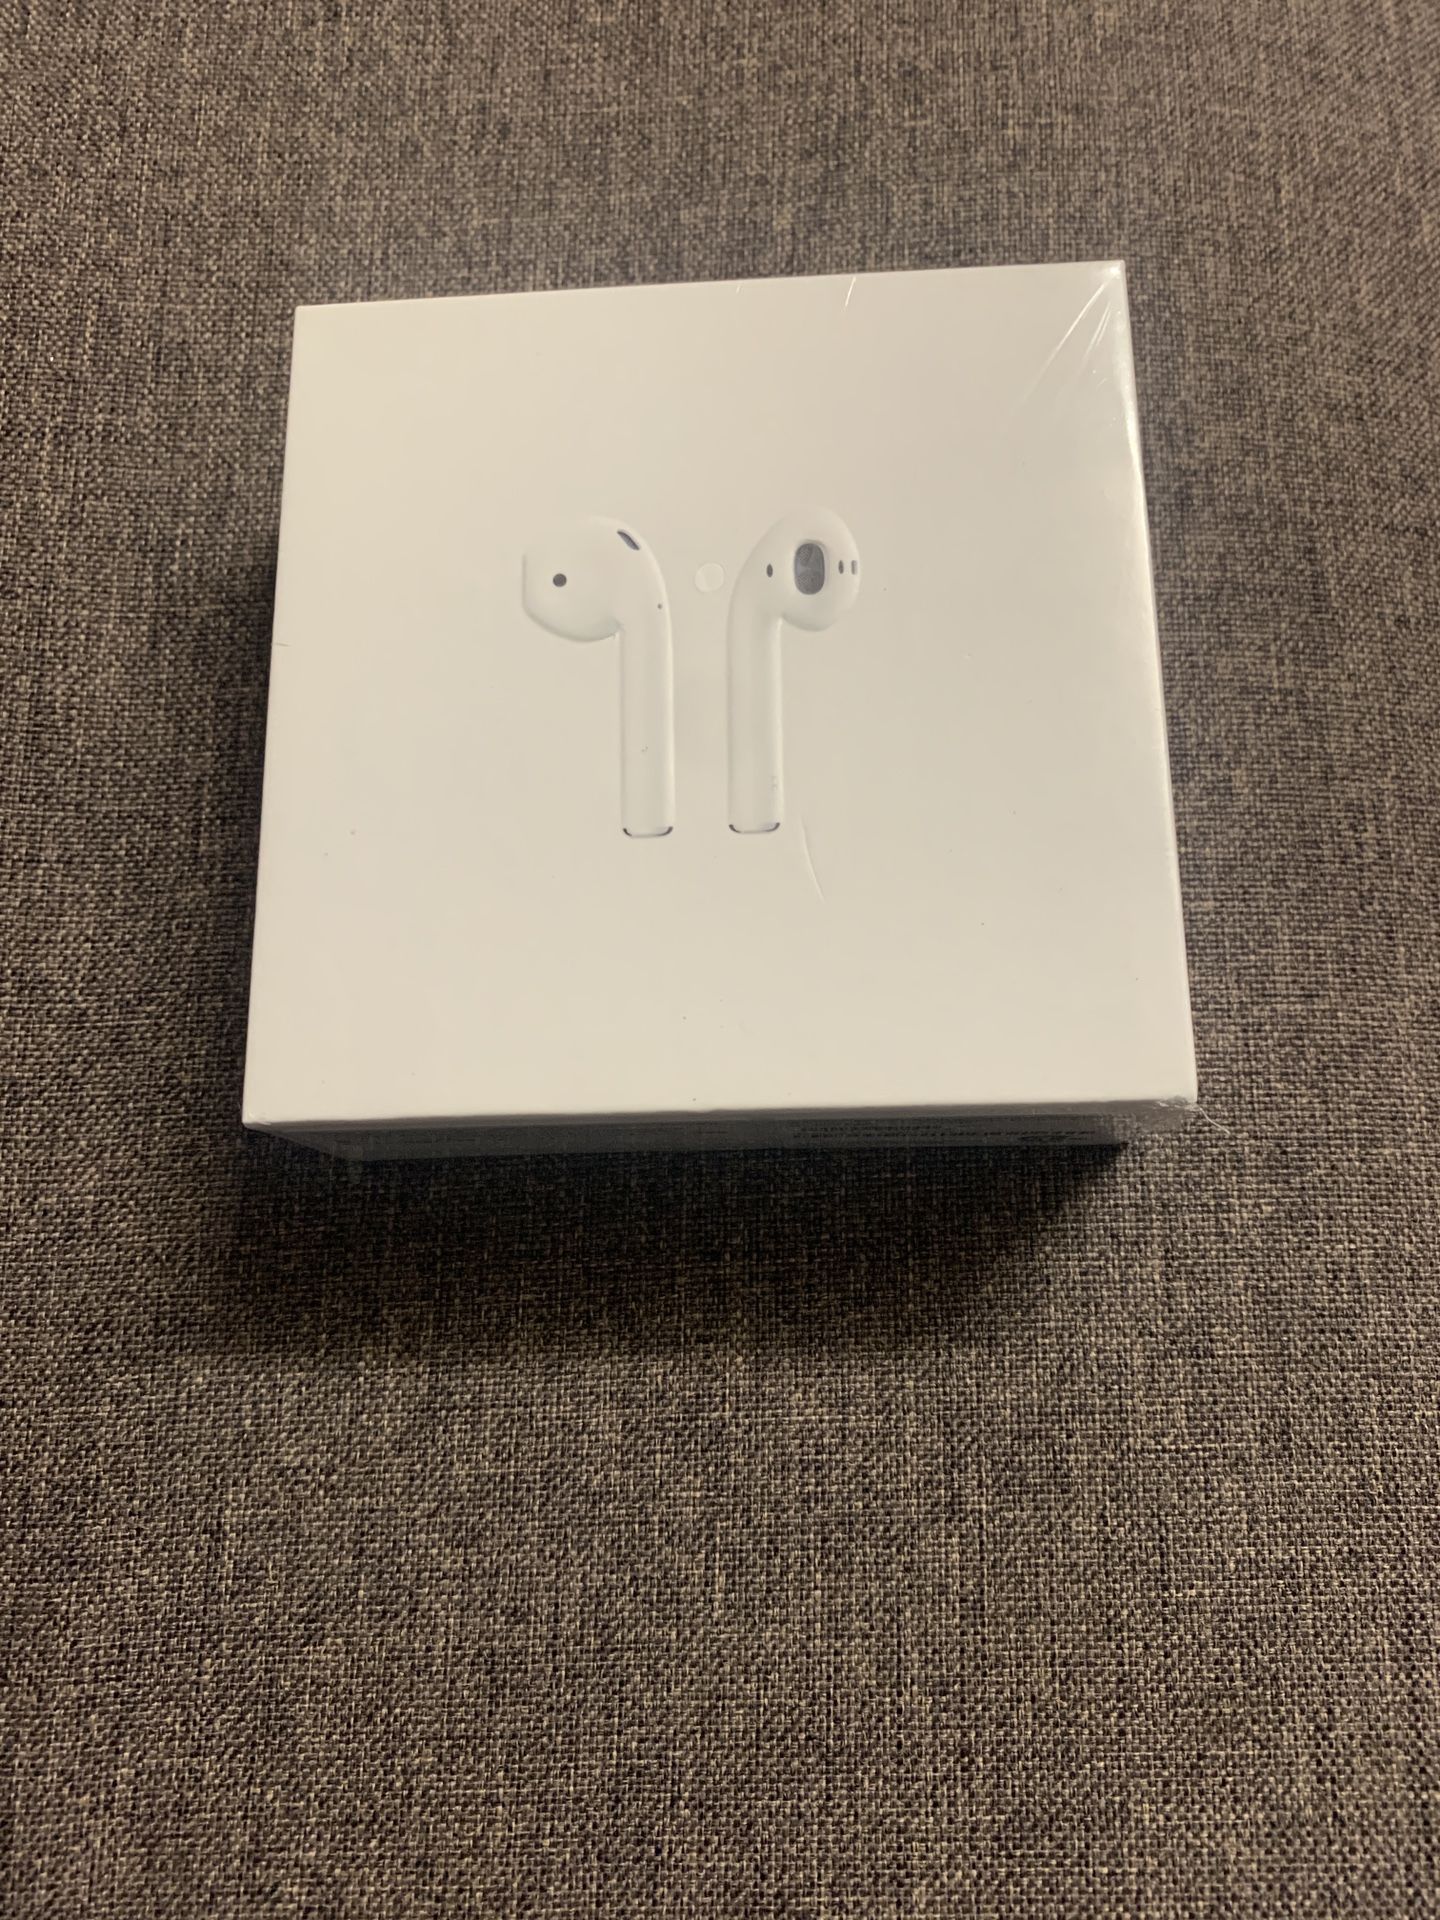 Apple airpods gen2 brand new sealed